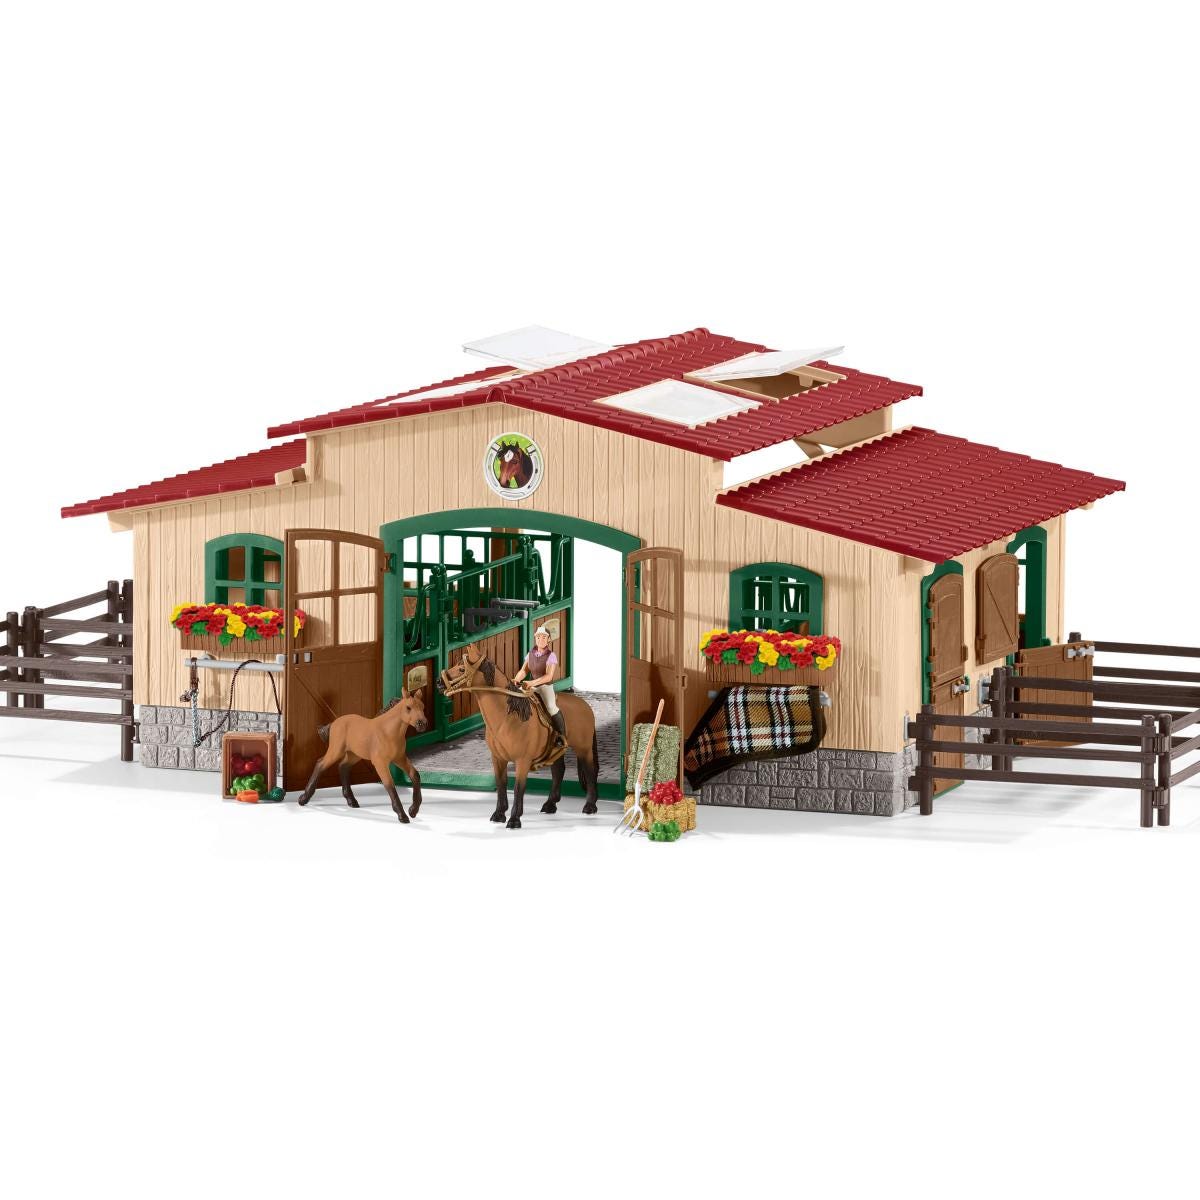 Stable with horses and accessories